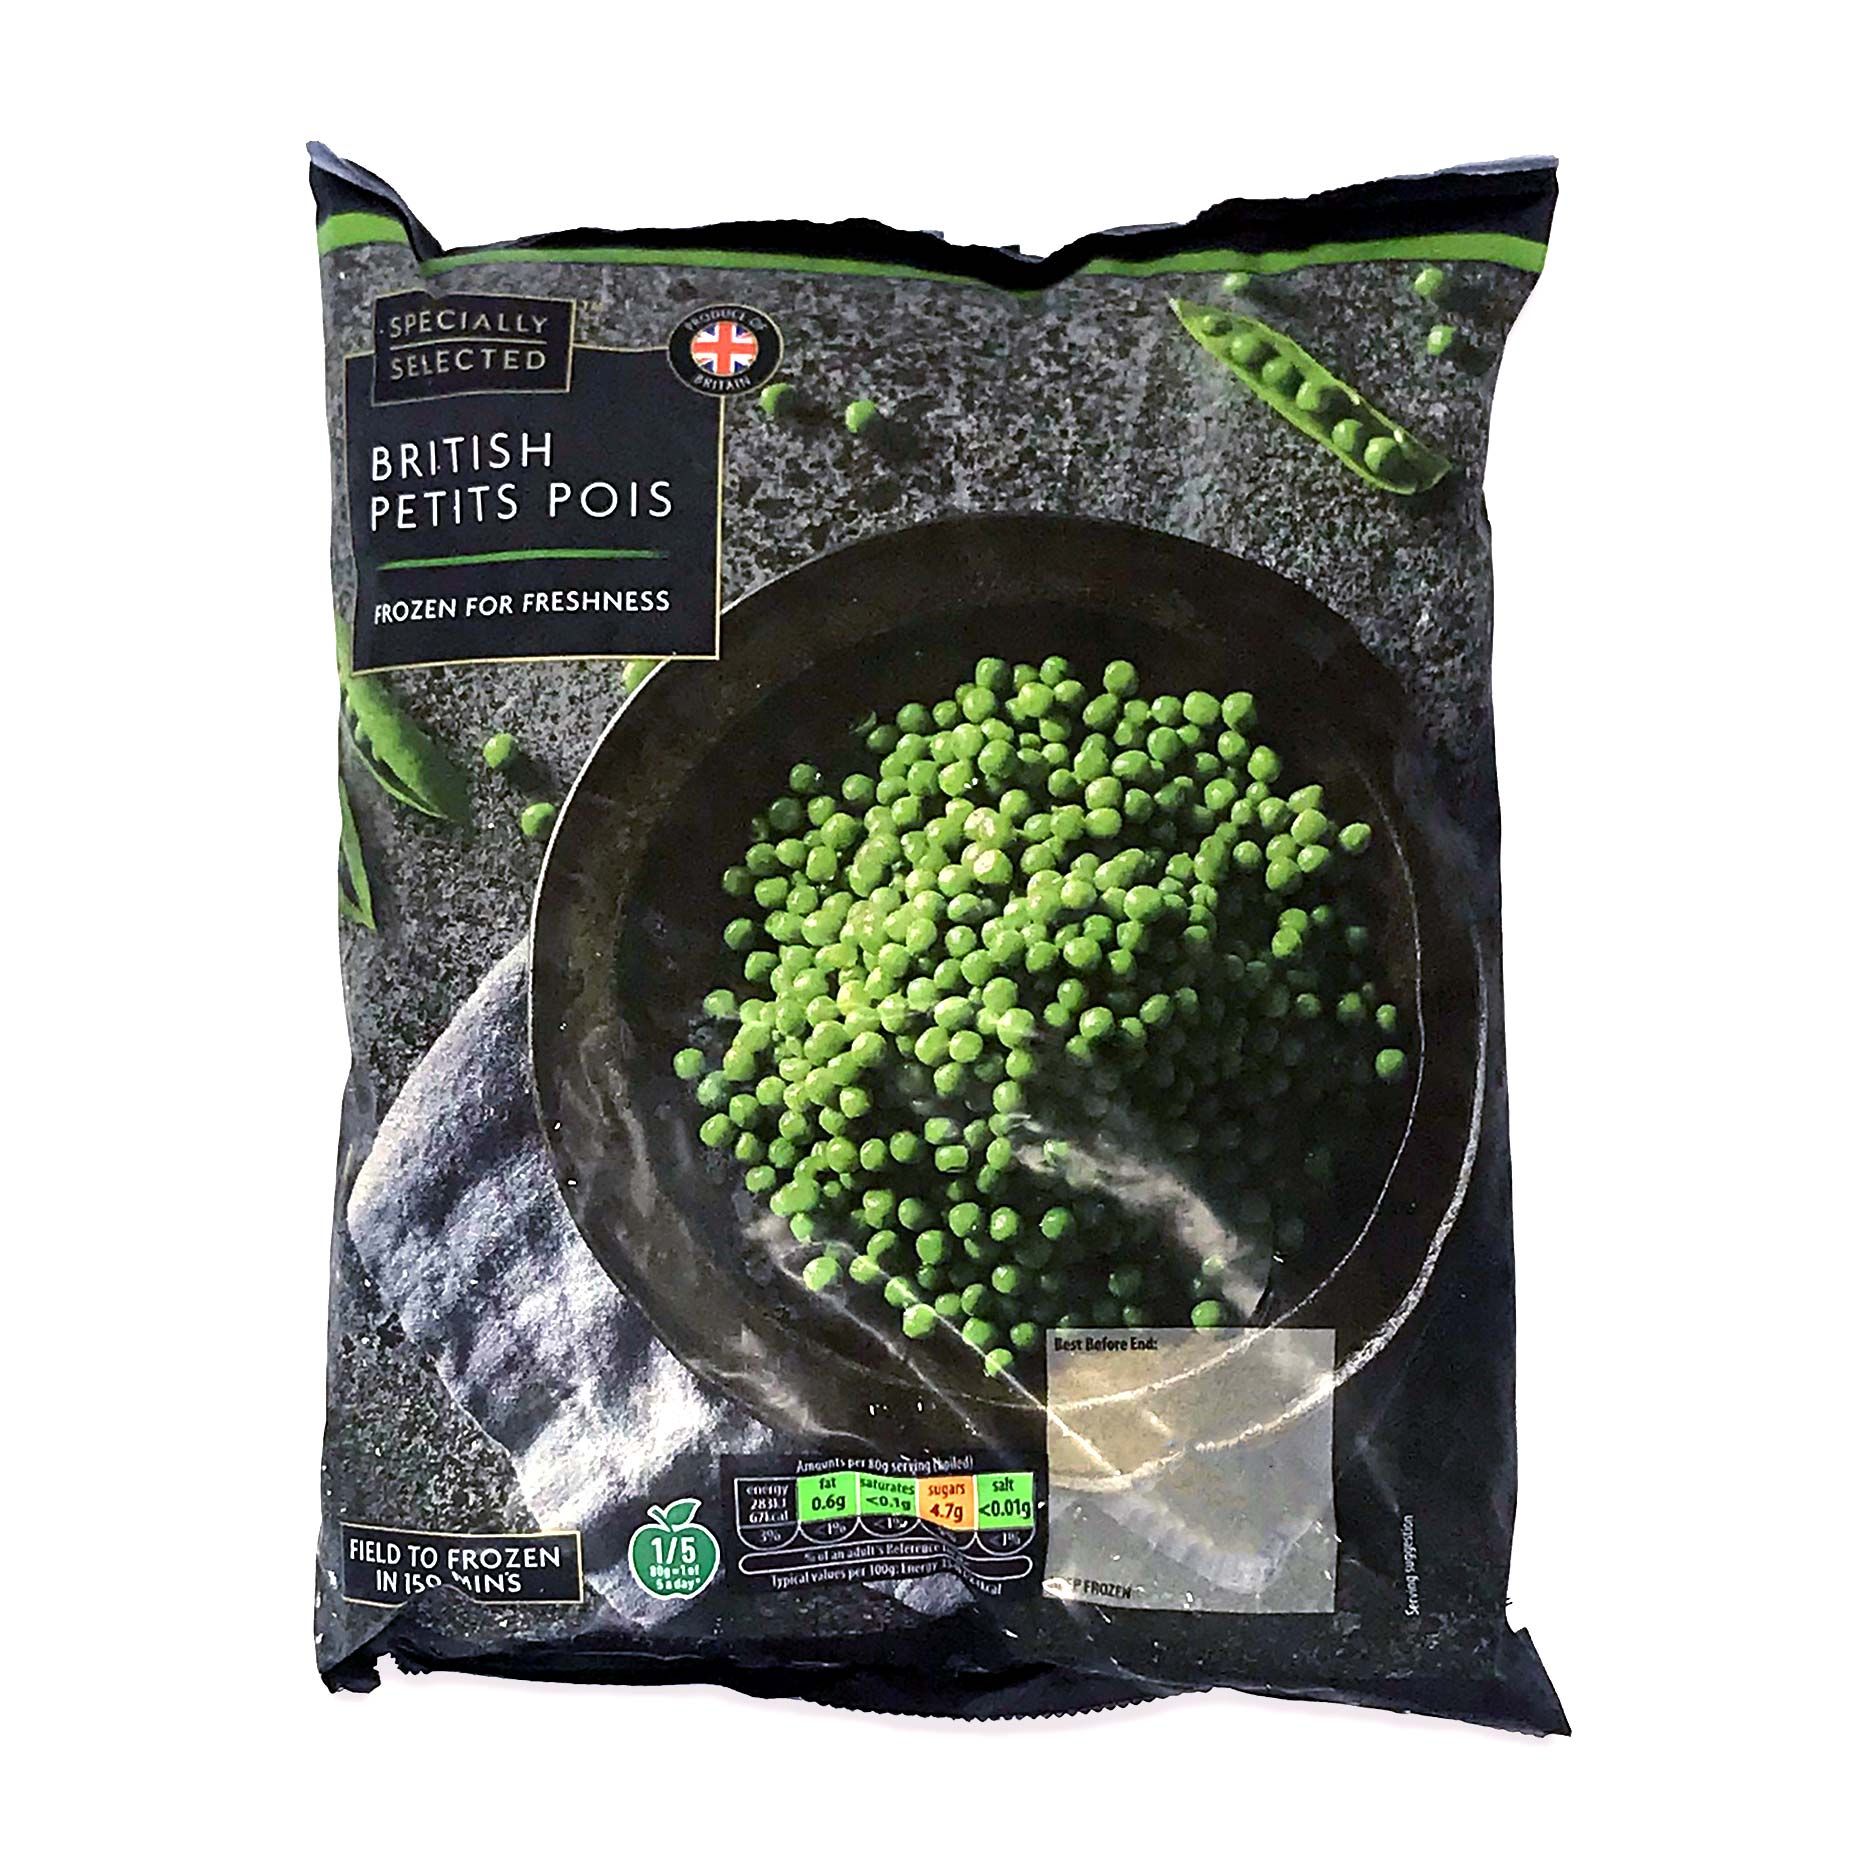 Specially Selected British Petits Pois 700g Aldi